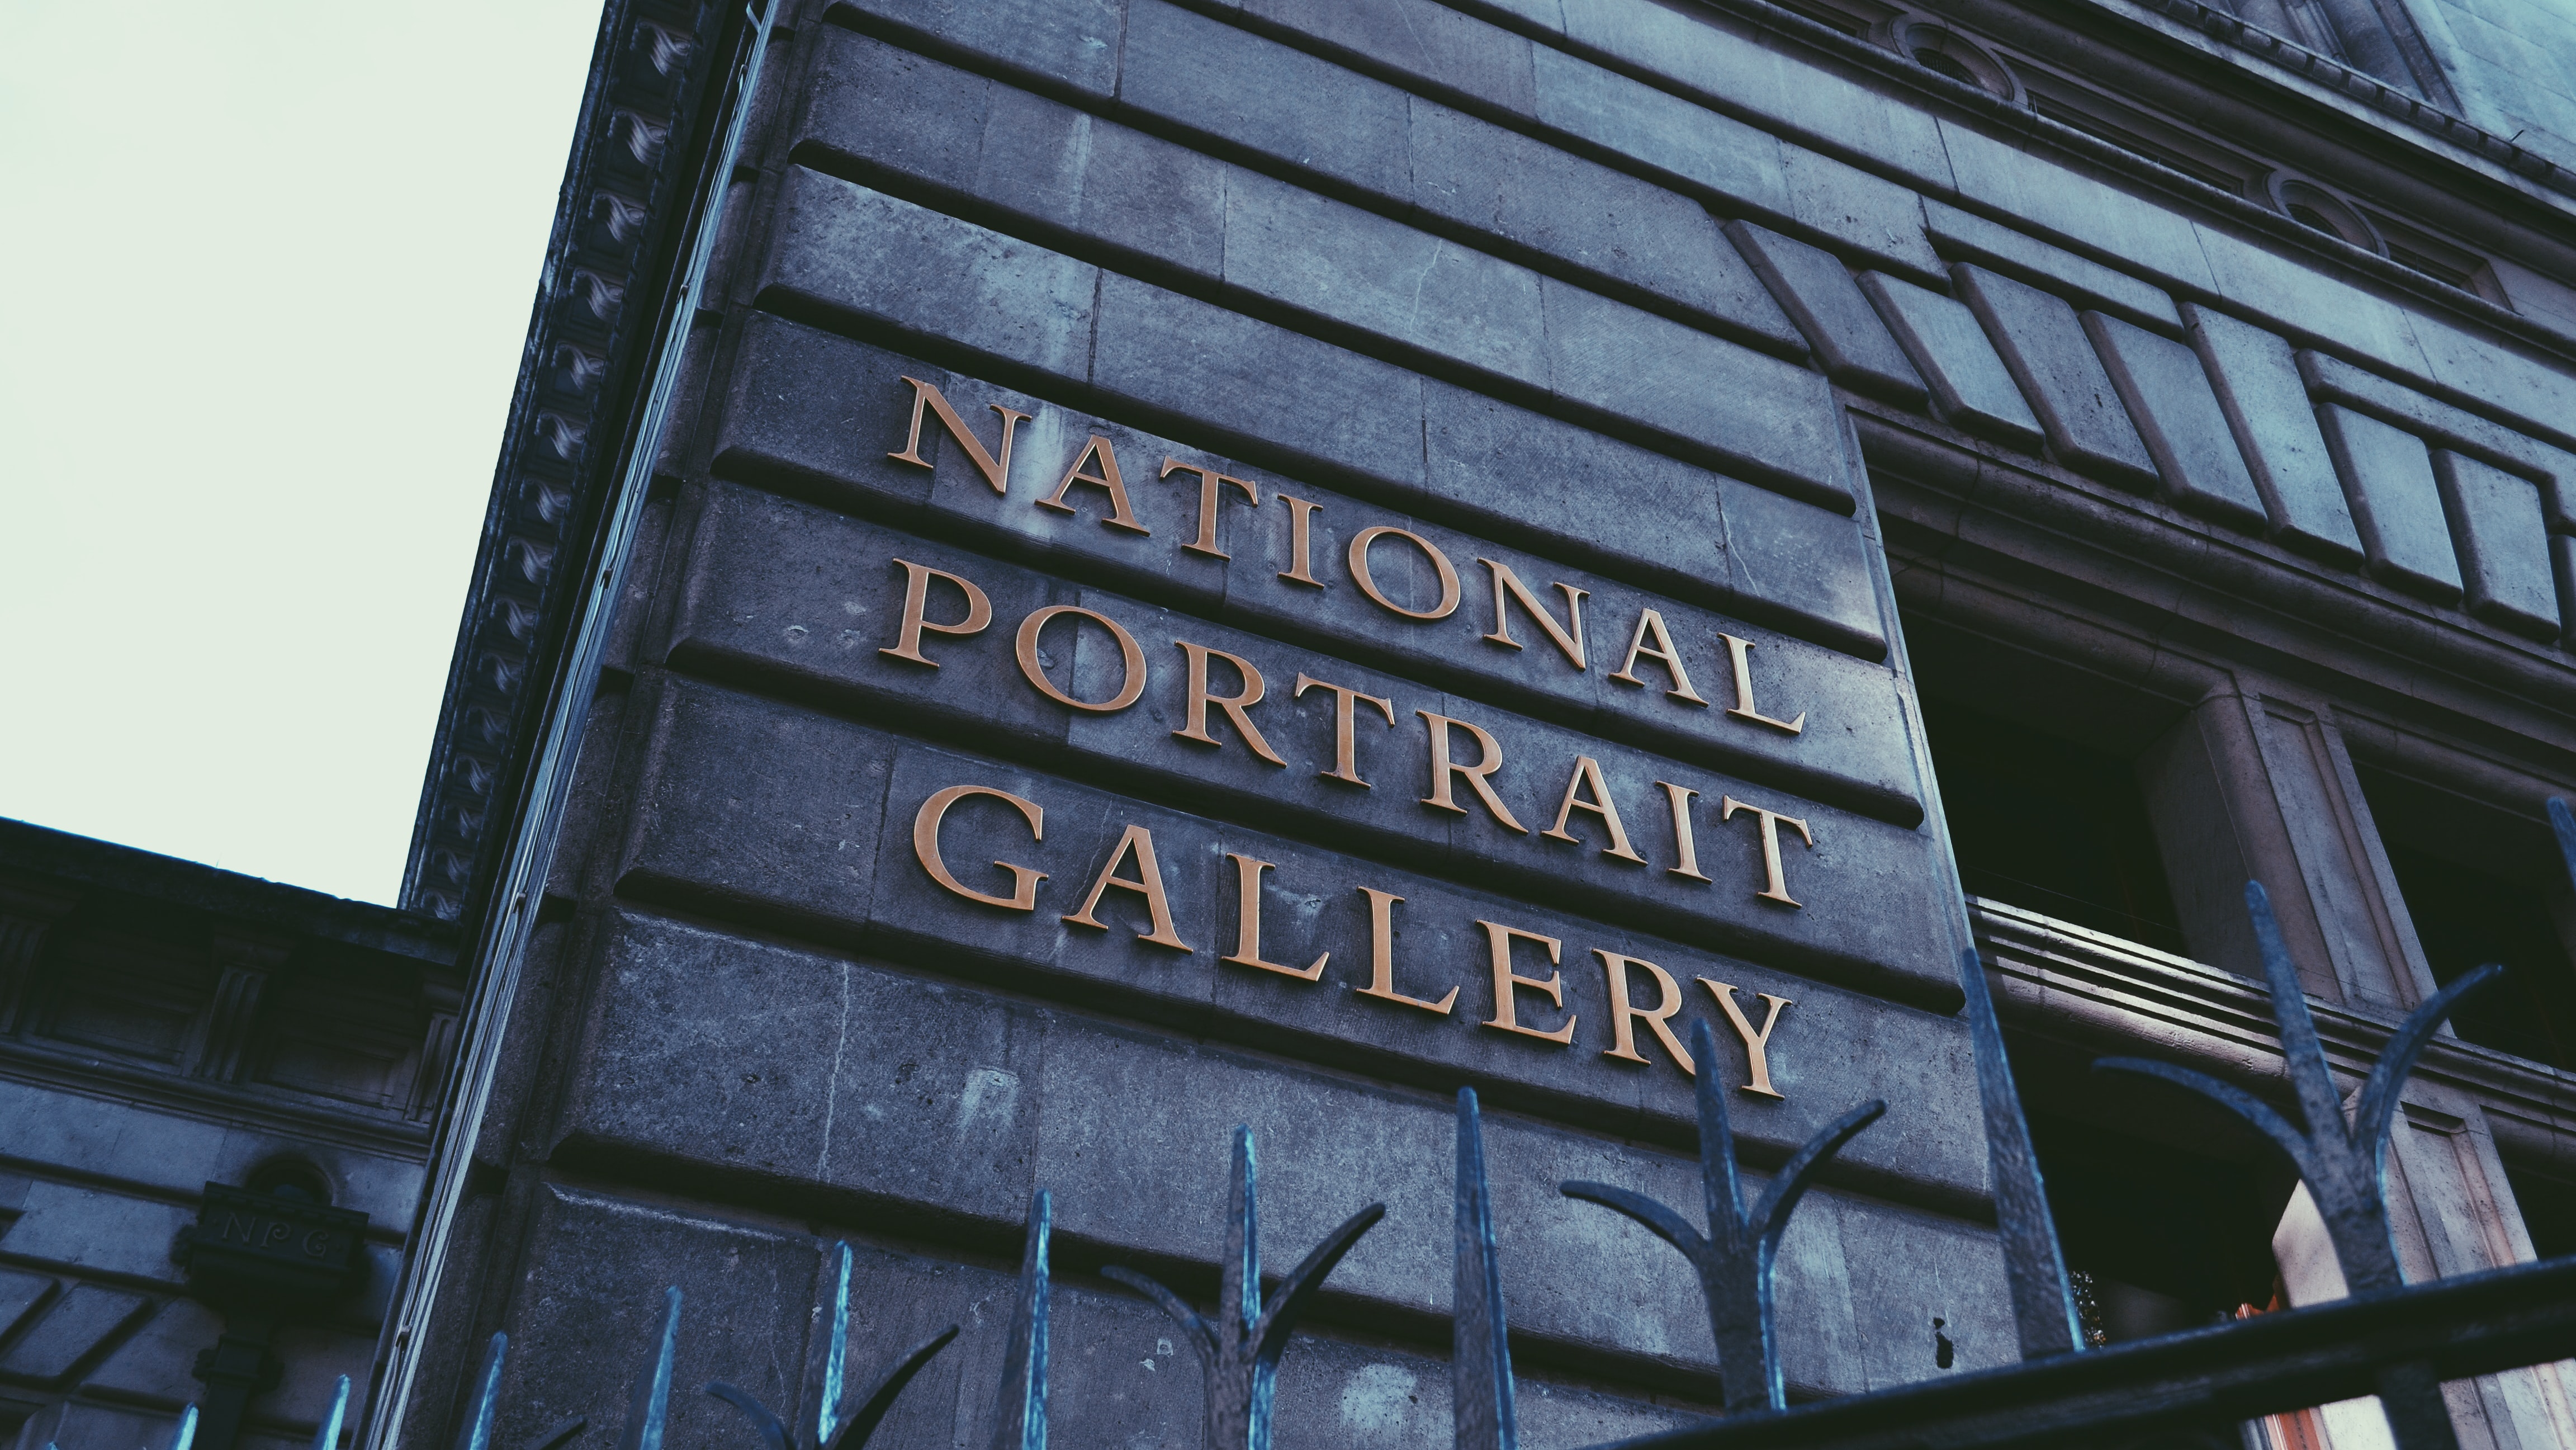 Image of the National Portrait Gallery in London